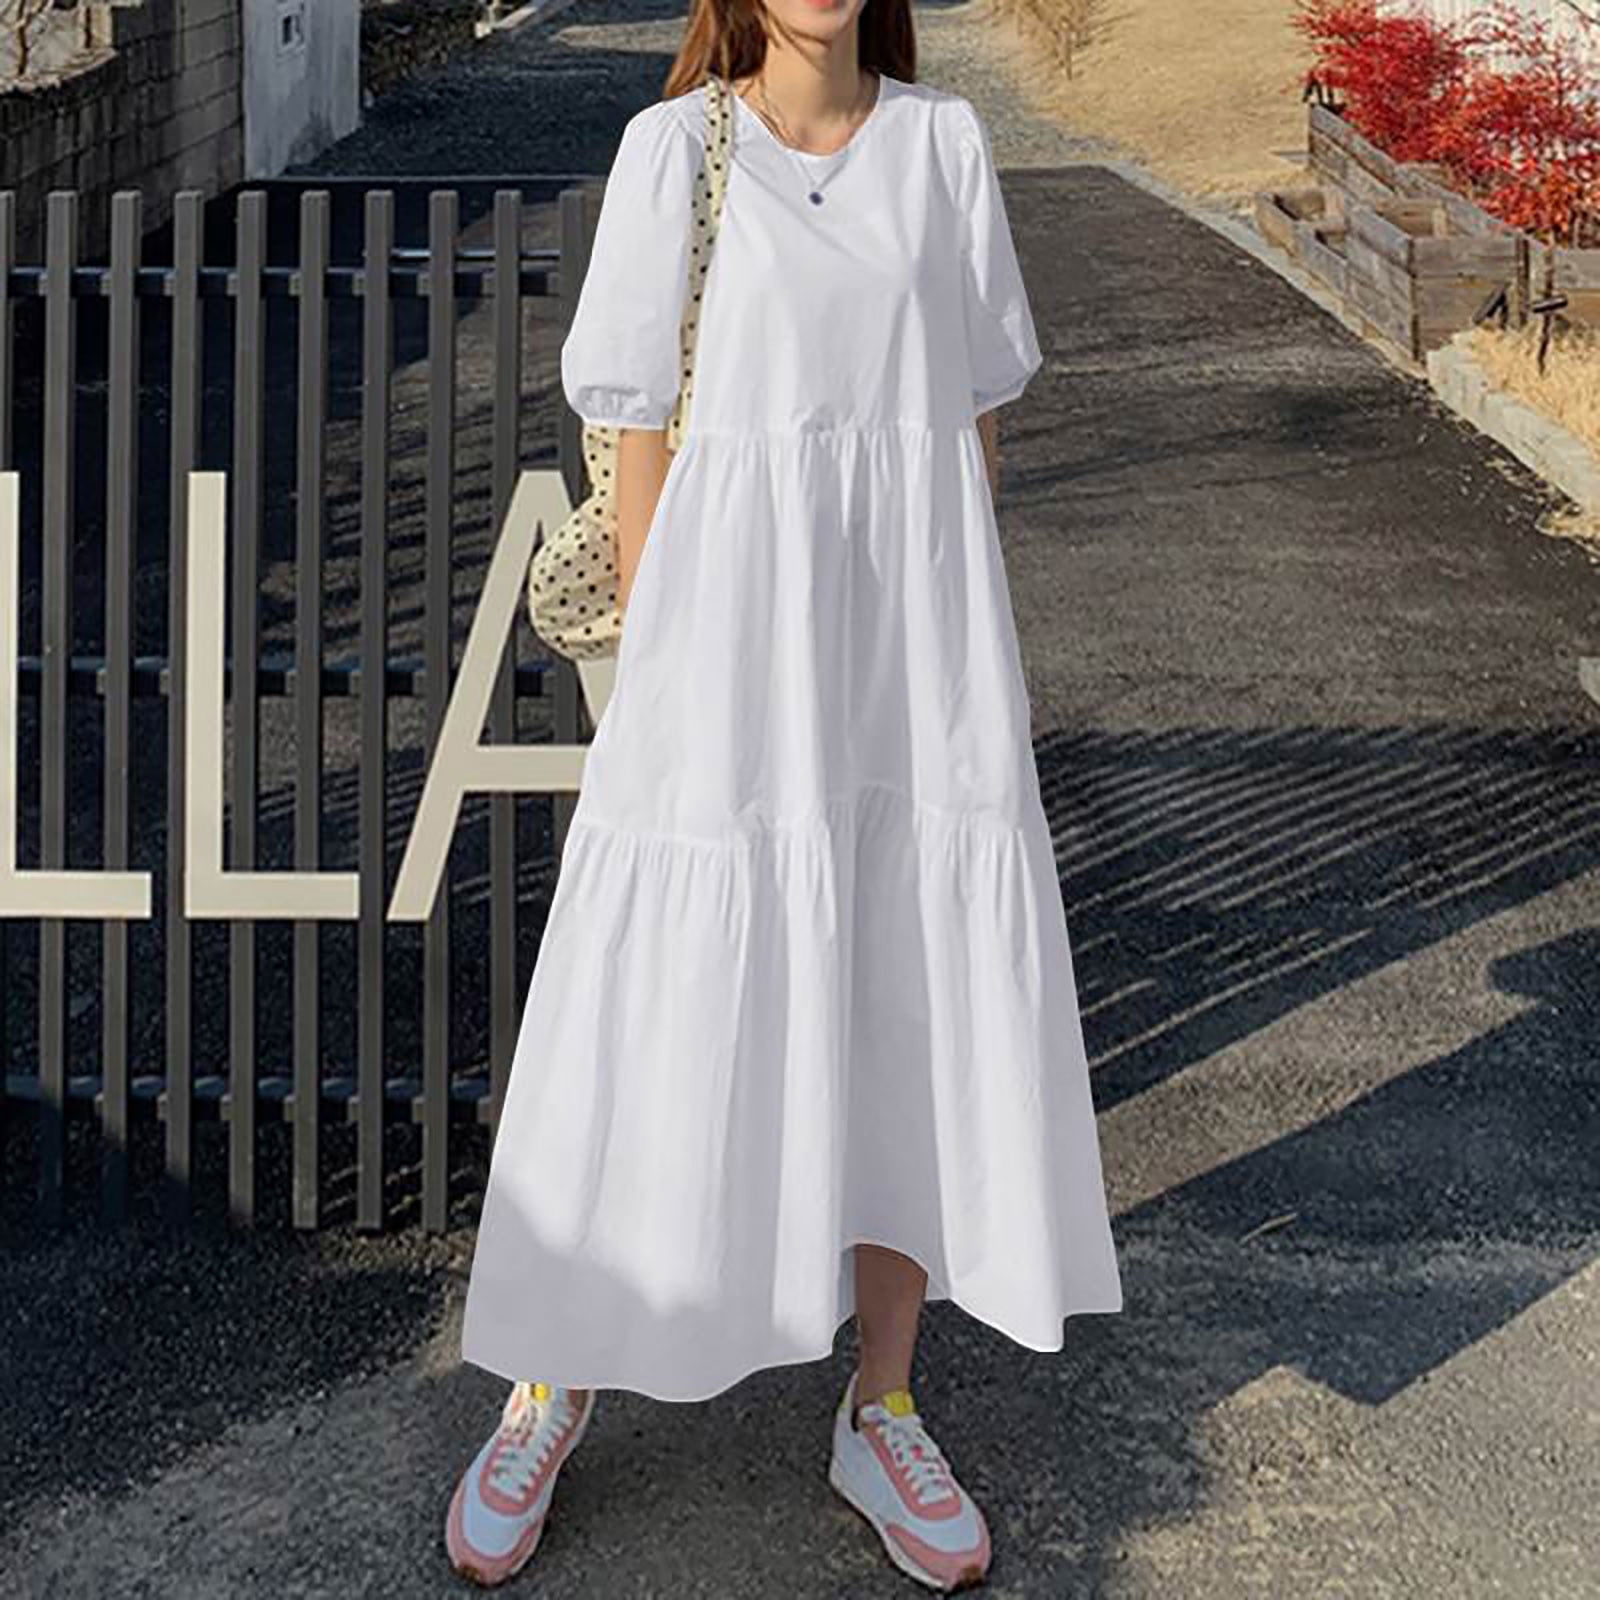 CTEEGC Womens Dresses Casual Loose Solid Color Cotton Linen Irregular  Stitching Round Neck Long Sleeve Large Swing With Pocket Dress Savings up  to 30% off 